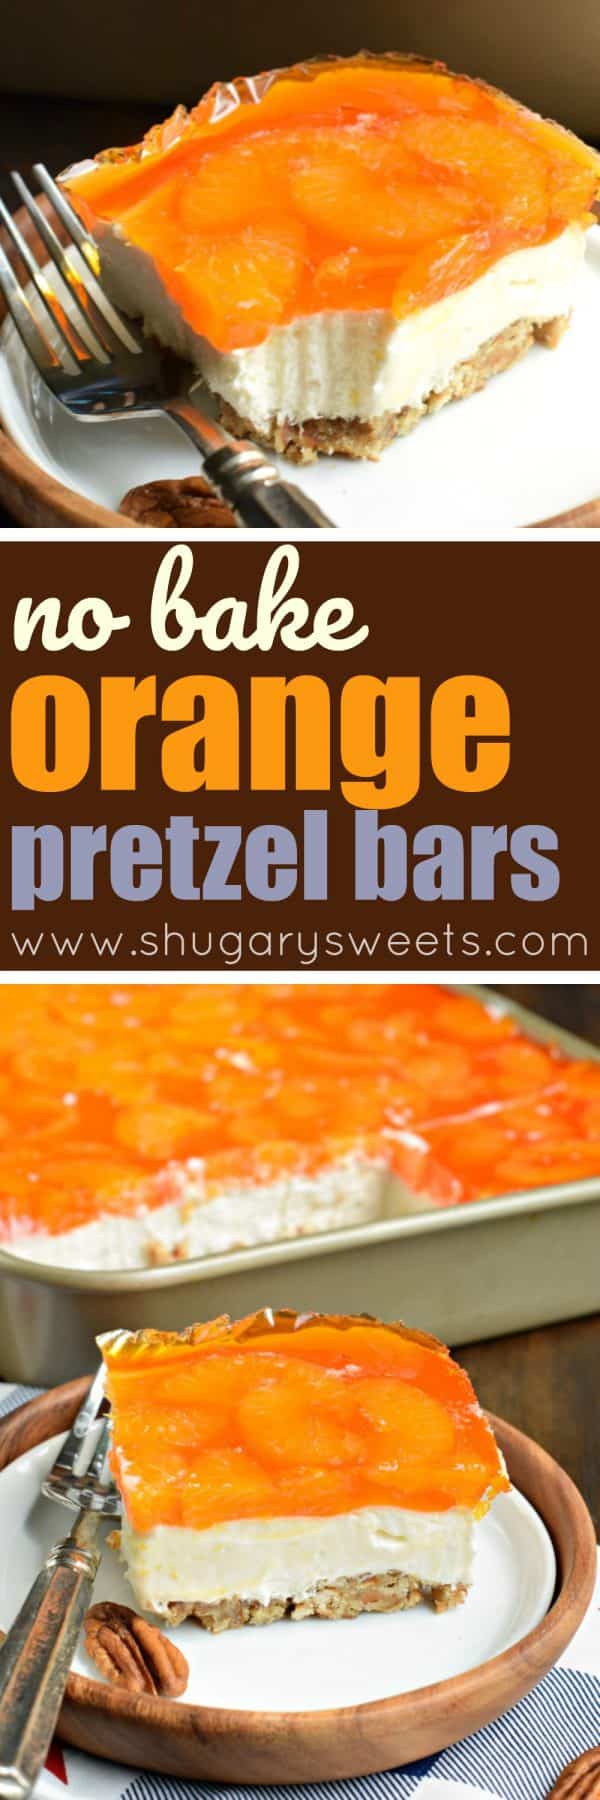 Sweet and salty, this Mandarin Orange Pretzel Bars recipe is the perfect dish to share this summer! You'll love the nutty pecans in the crust of this sweet treat!